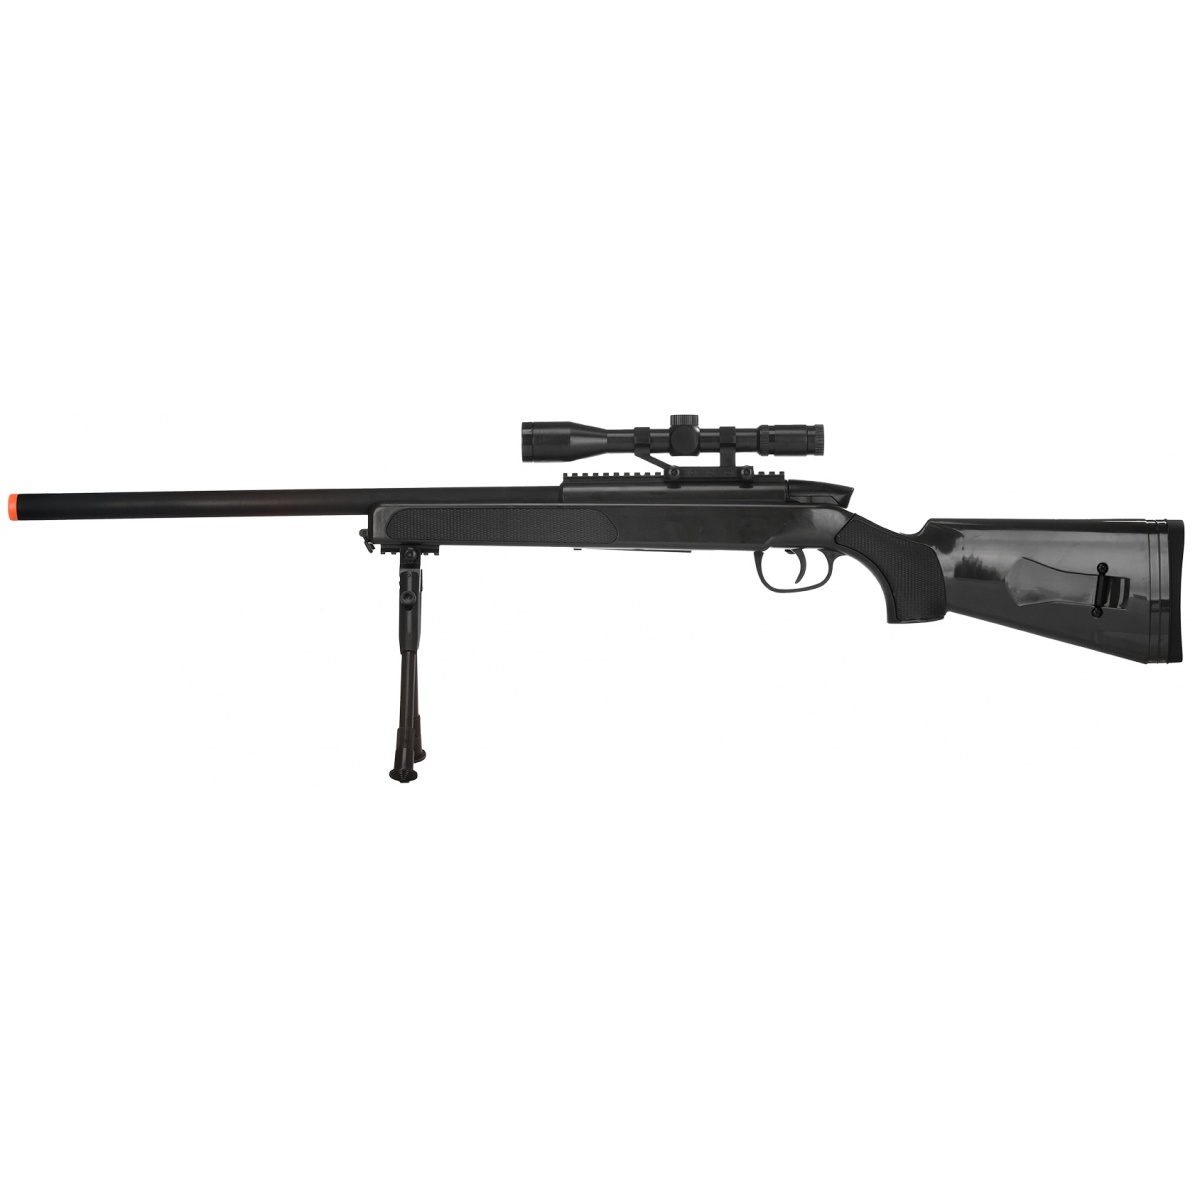 5 Best Airsoft Sniper Rifle Under $150 for 2019 